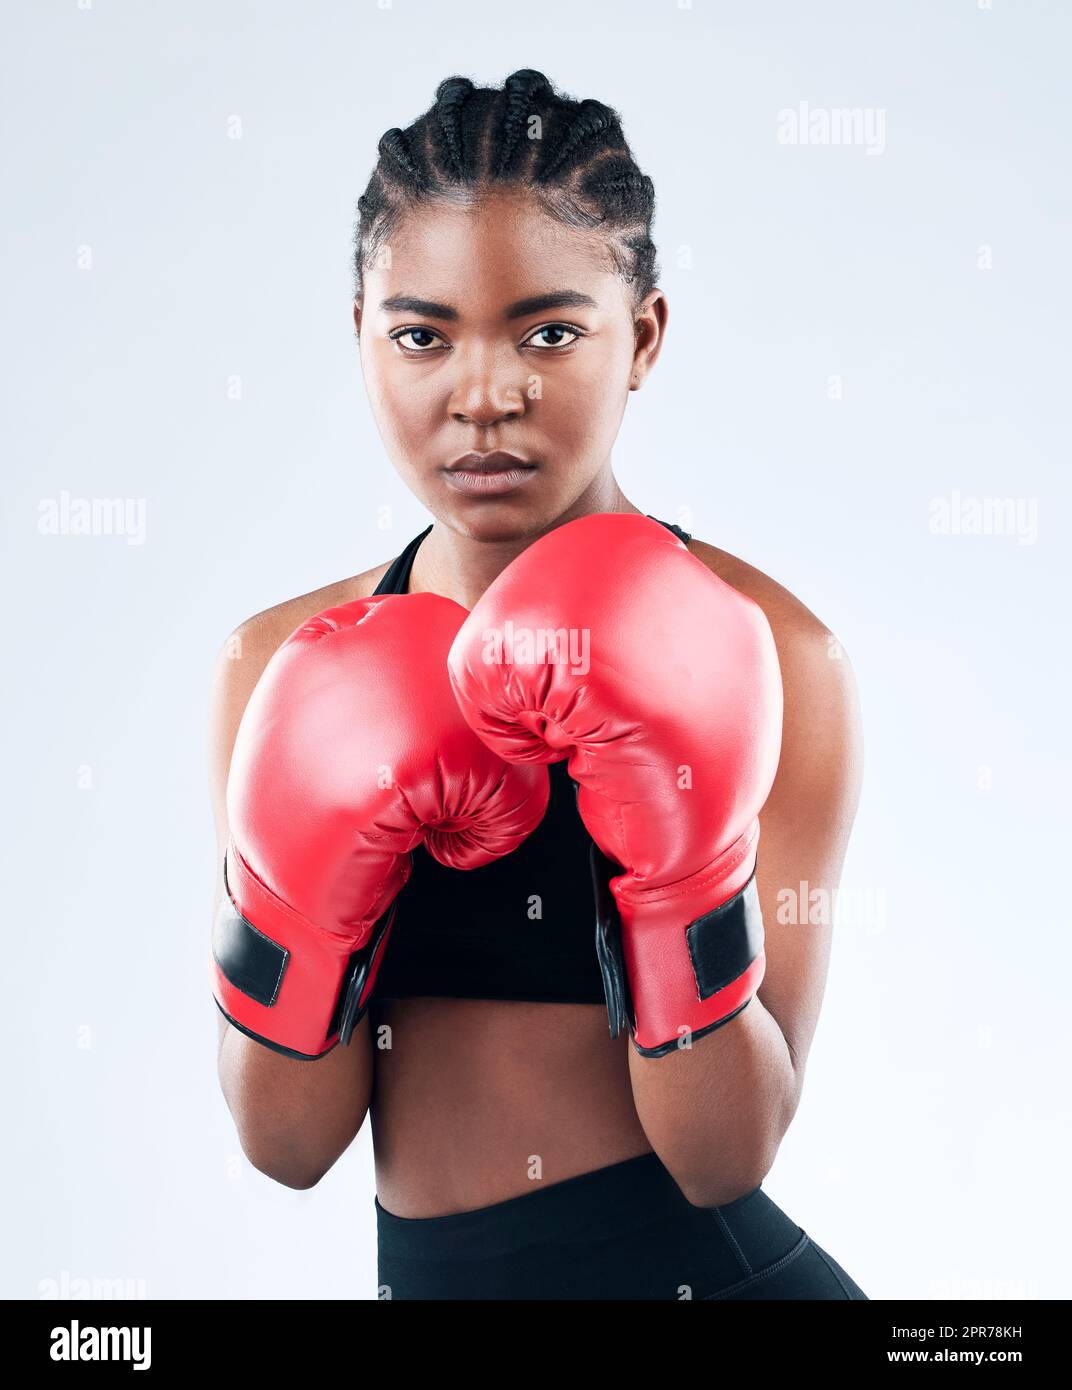 An athletic woman in boxers gloves posing for the camera Stock Photo - Alamy